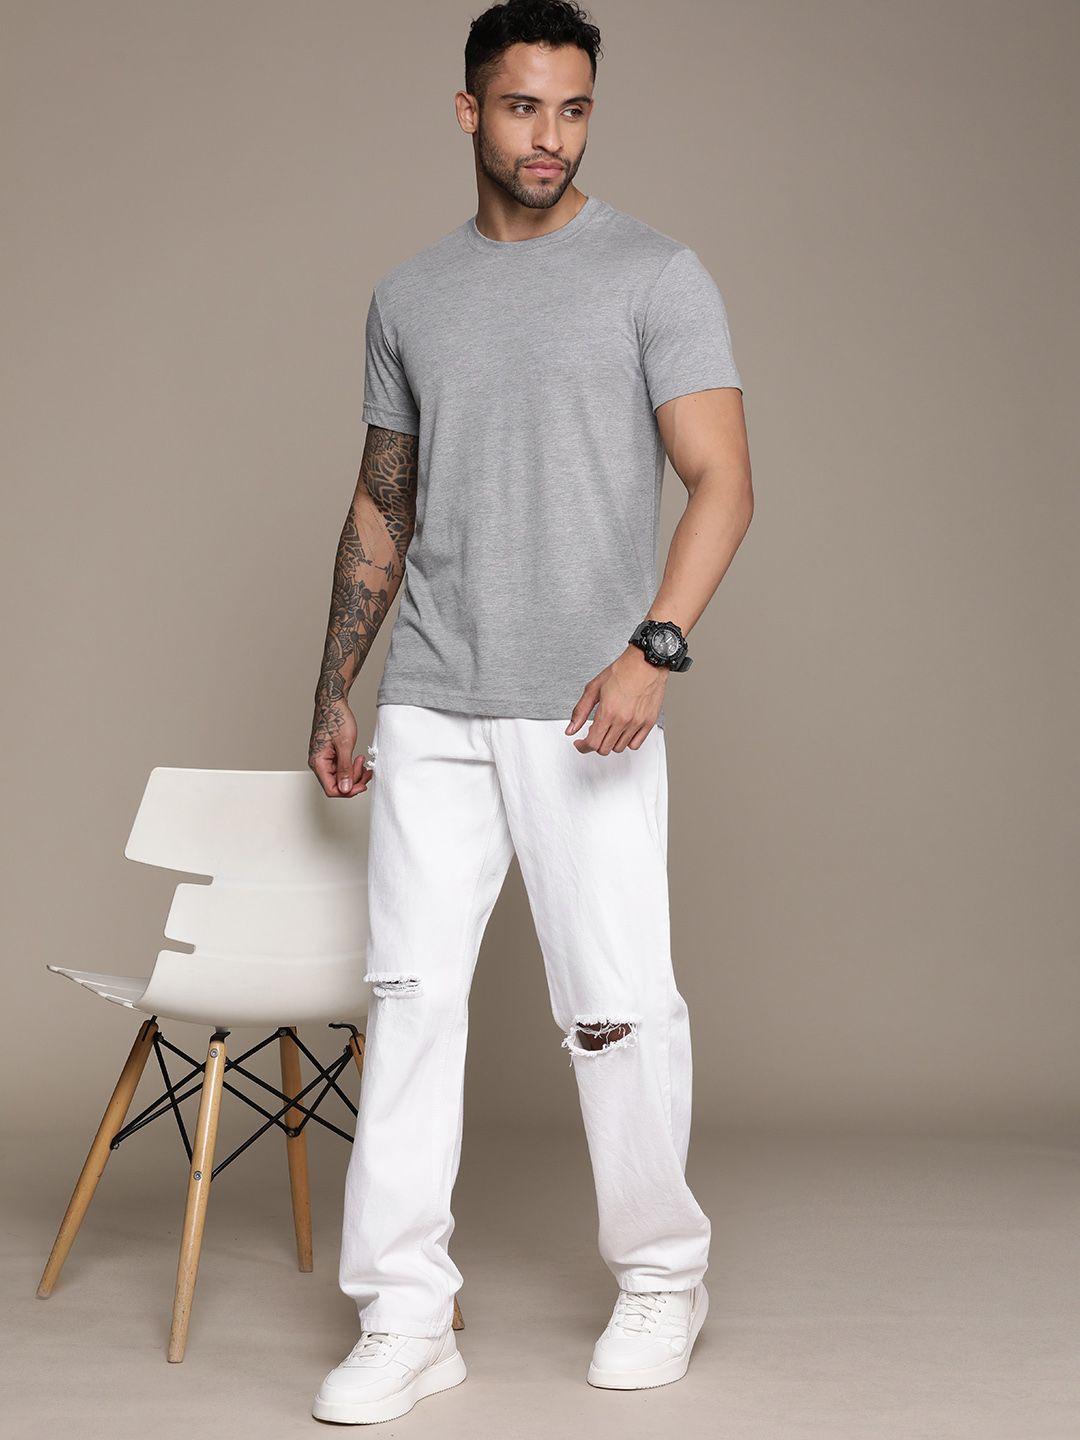 the-roadster-lifestyle-co.-men-straight-fit-cotton-jeans